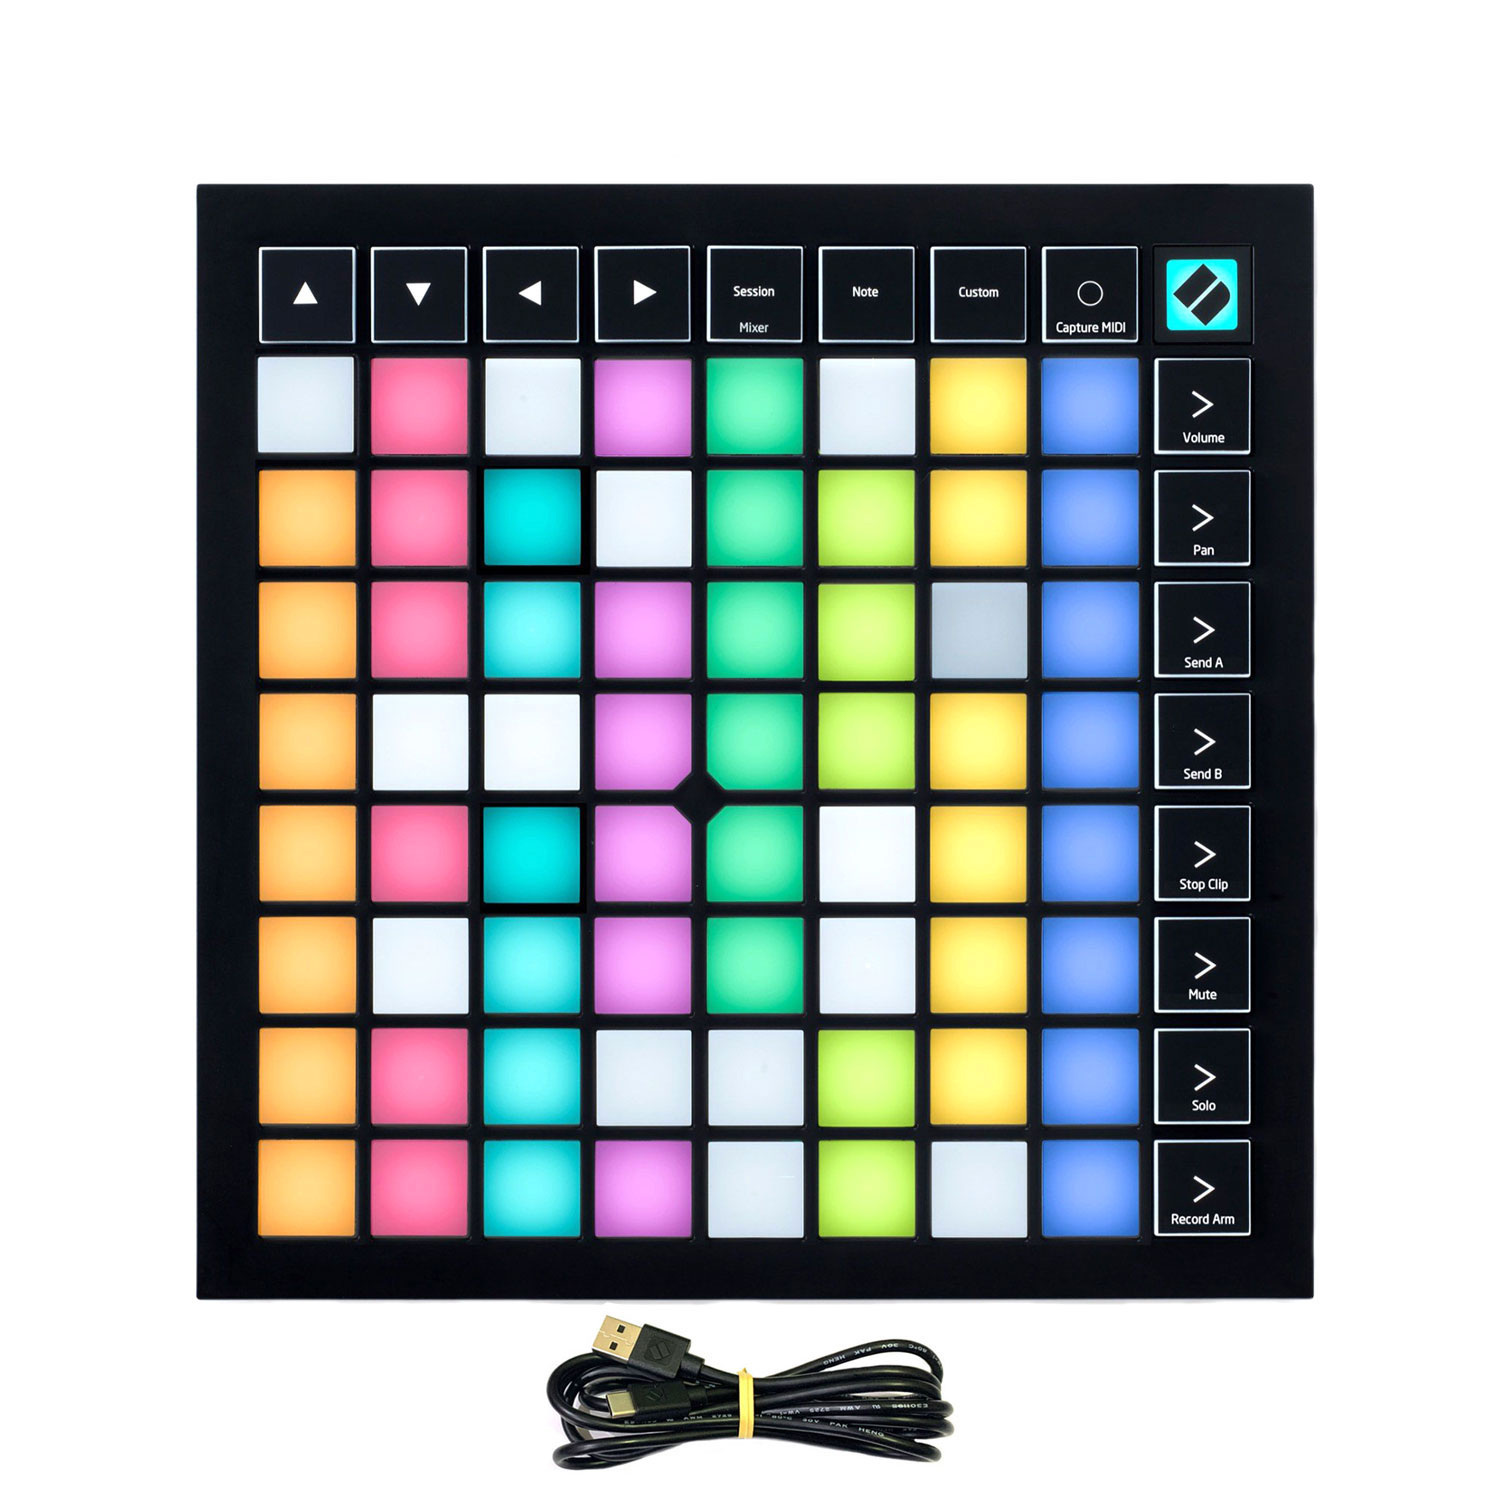 Gia-re-Novation-Launchpad-X-MK3-Grid-Controller-for-Ableton-Live